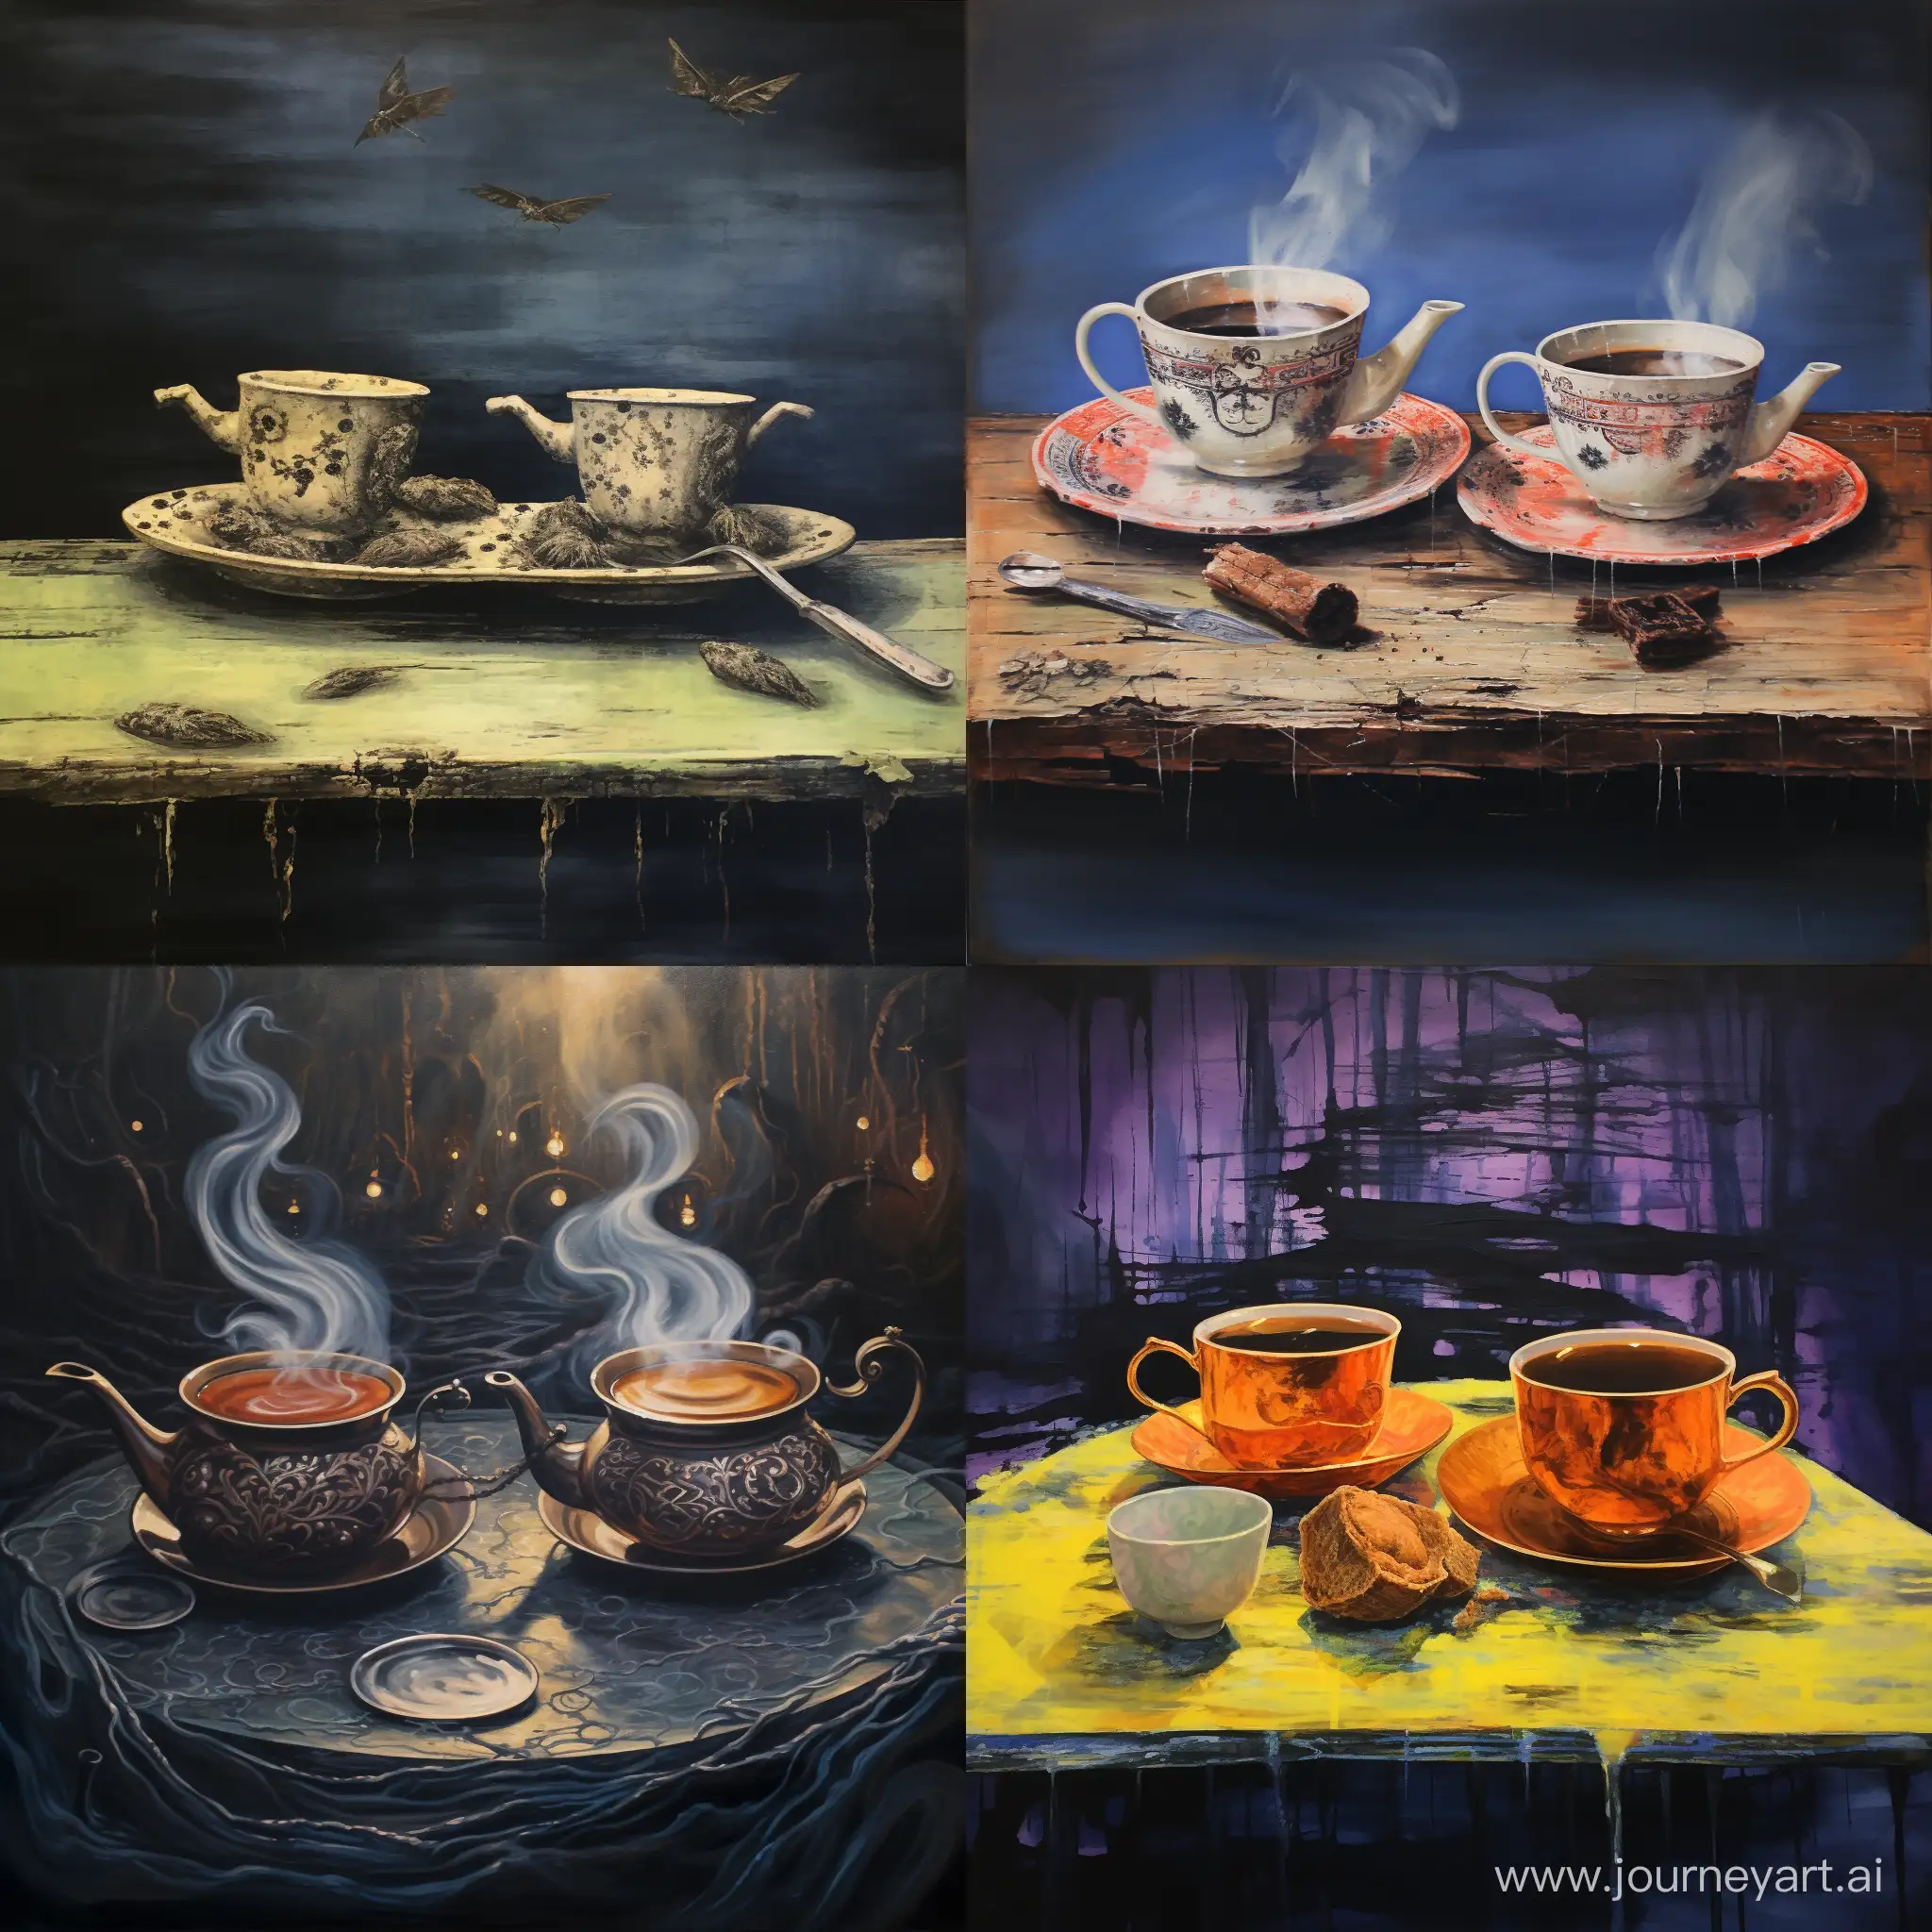 a david style inspired painting of a damping smoking tray of 2 cups of tea with a poisonous magical dangerous content